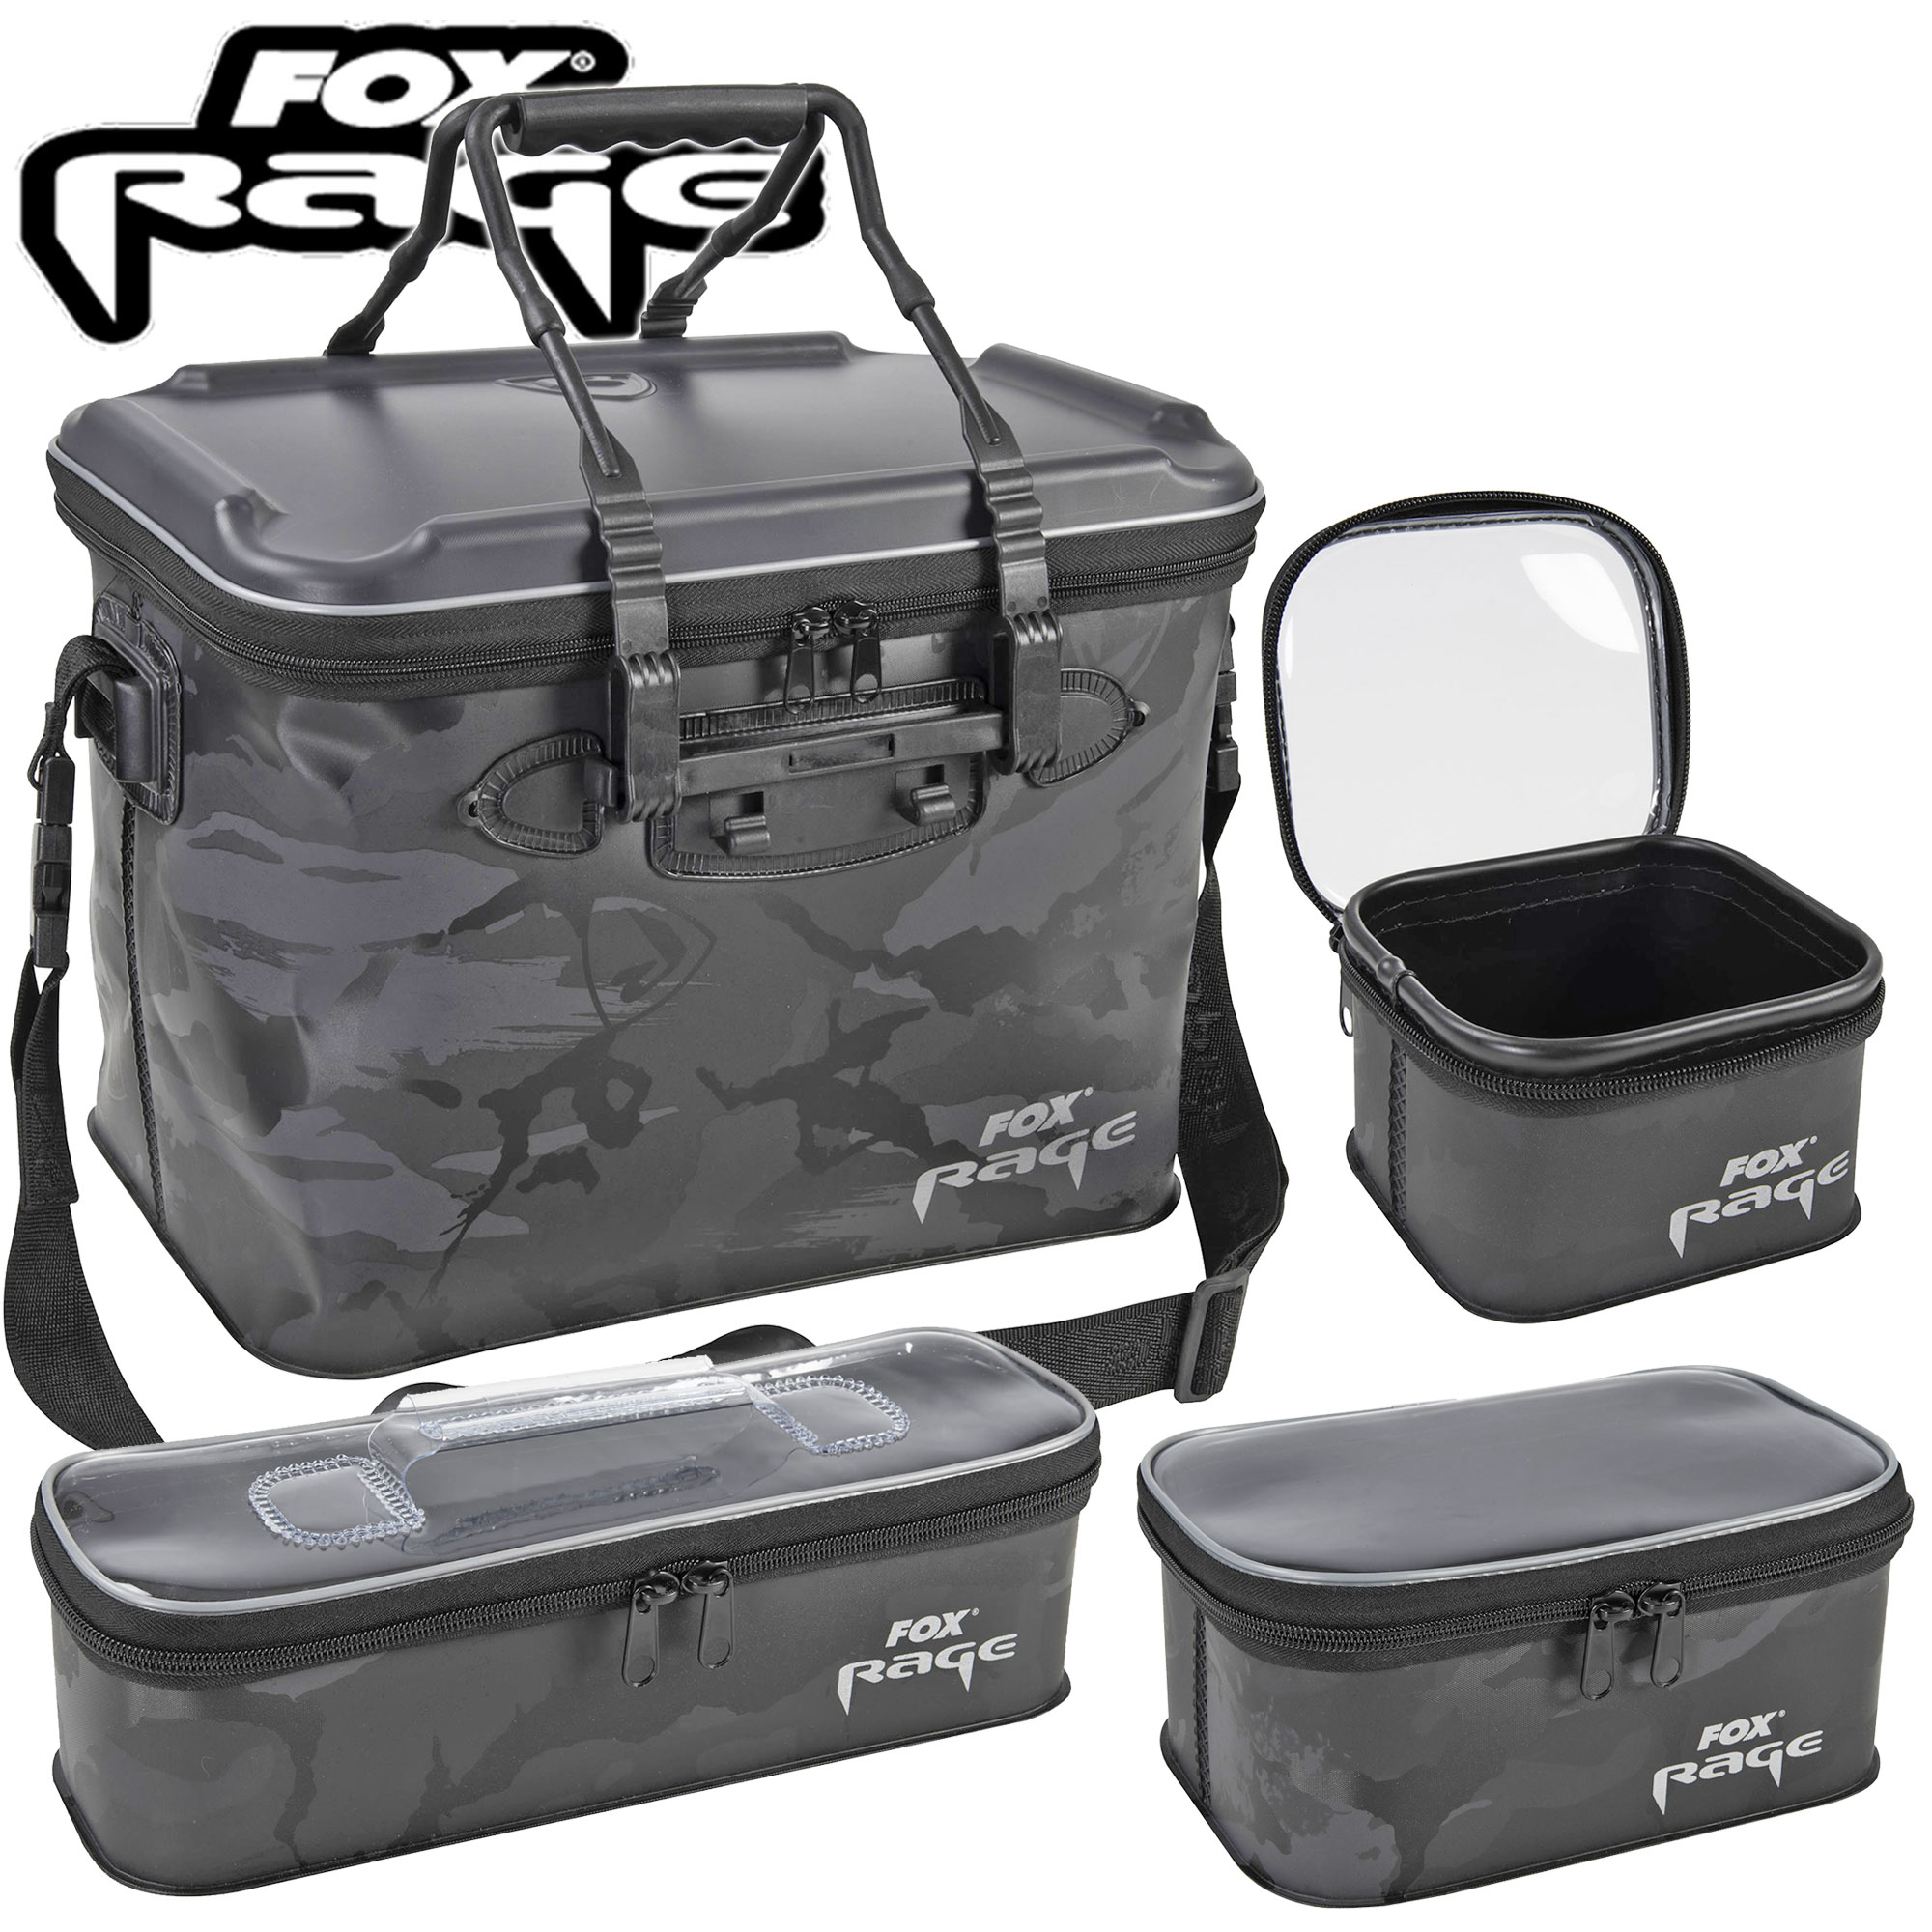 Pack Bagagerie Fox Rage Camo Welded Bag + 3 Trousses Accessory Bag